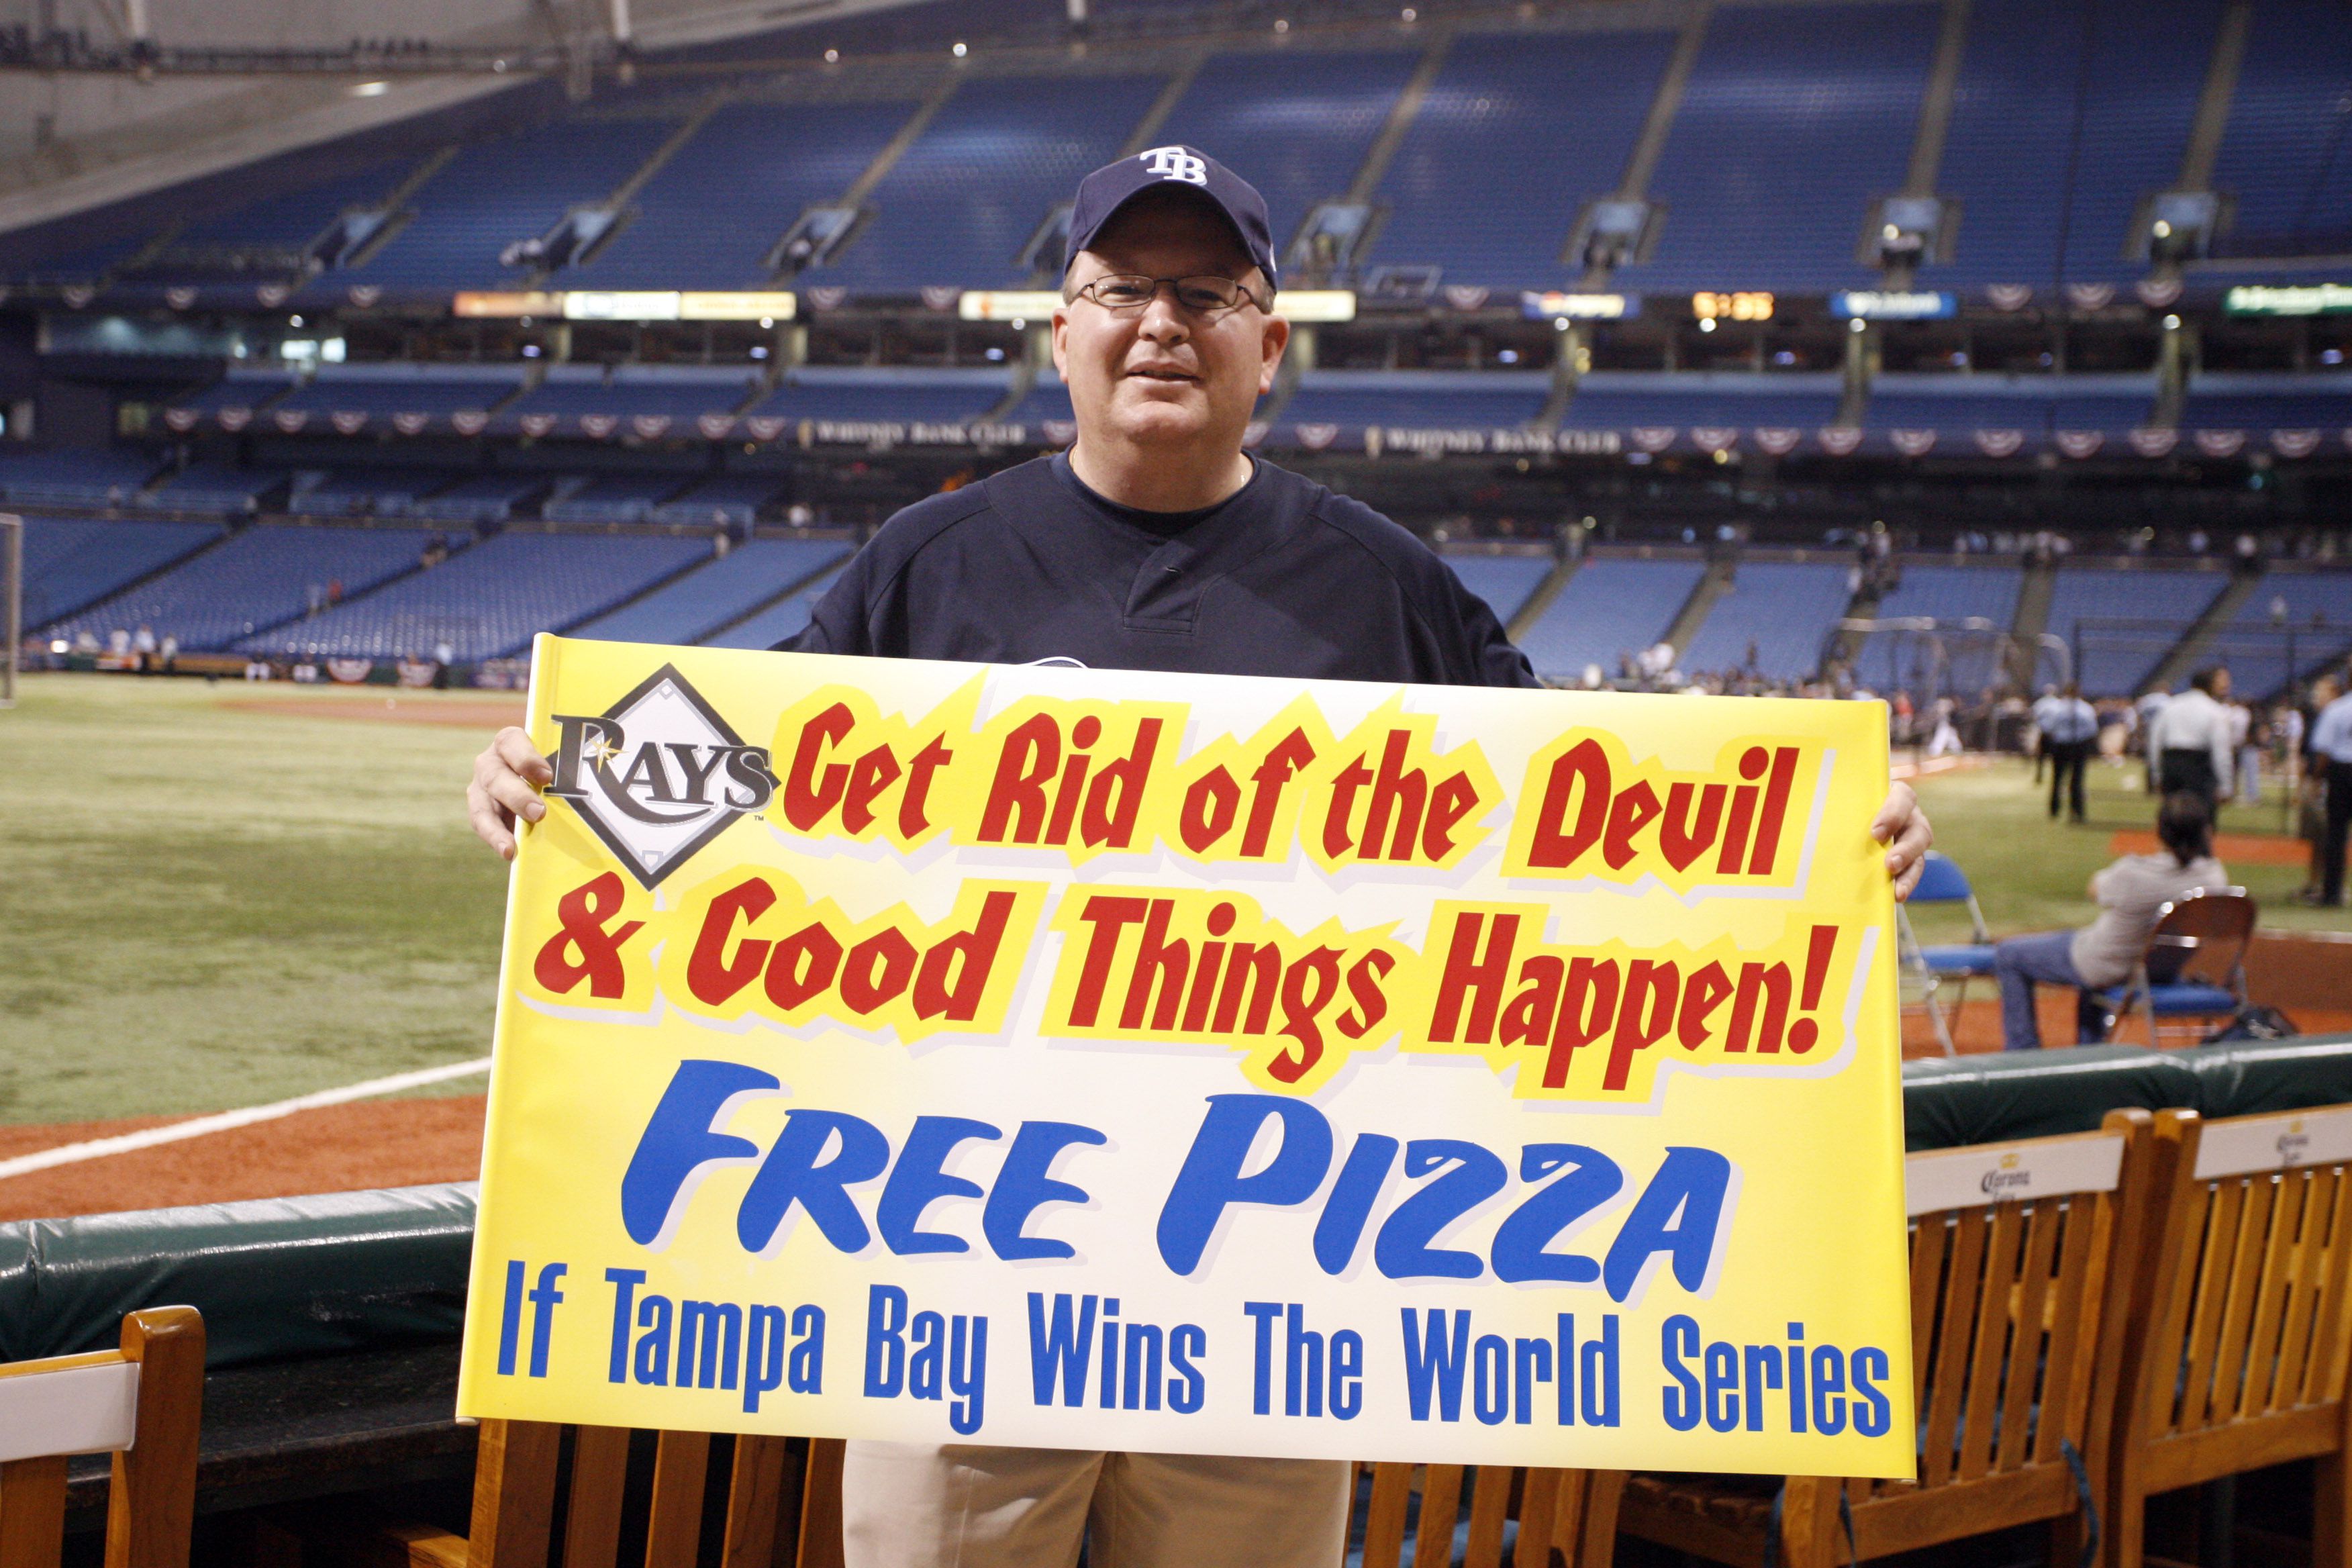 Tampa Bay Rays' Secret Sauce Hasn't Translated To A World Series Title — Yet